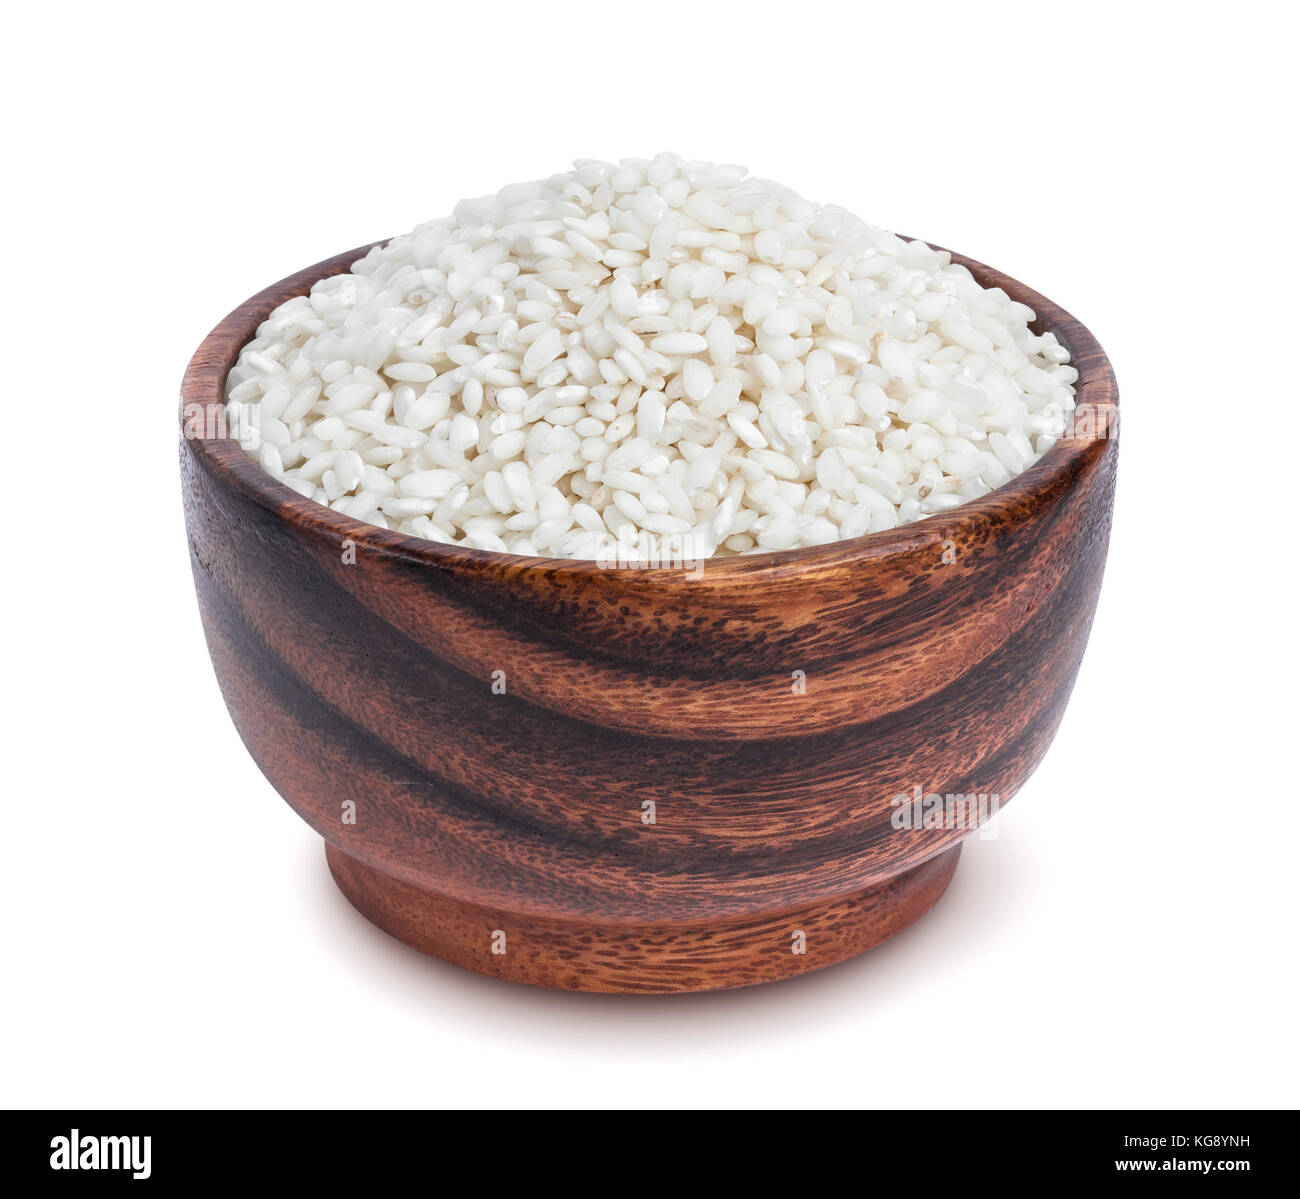 Risotto rice in wooden bowl isolated on white background Stock Photo